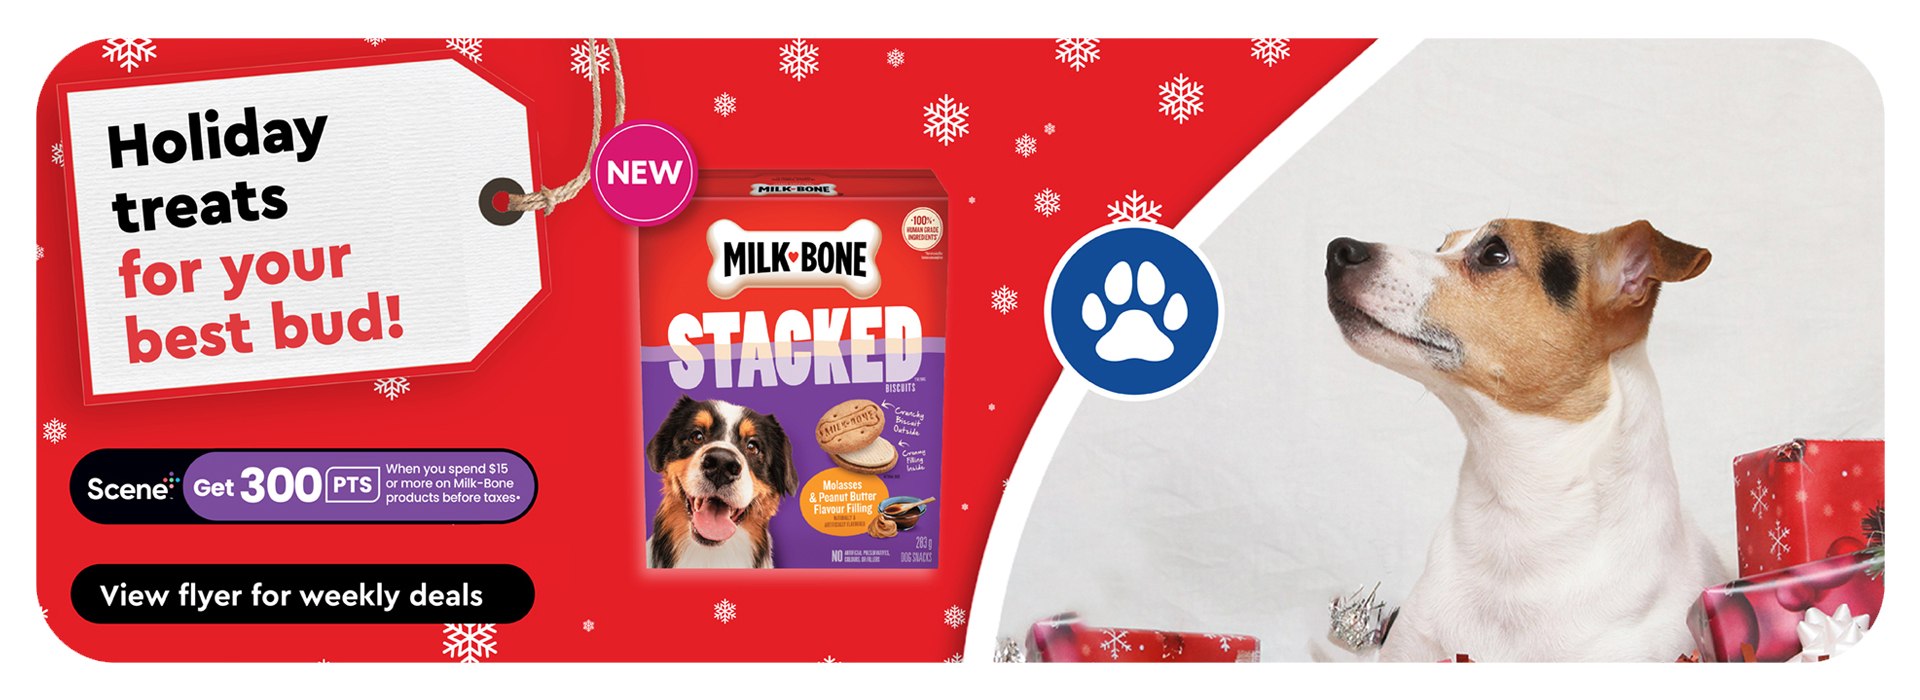 Text Reading 'Holiday treats for your best bud! With Scene+, get 300 points, when you spend $15 or more on Milk-Bone products before taxes. To 'View flyer for weekly deals', click on the button given below.'